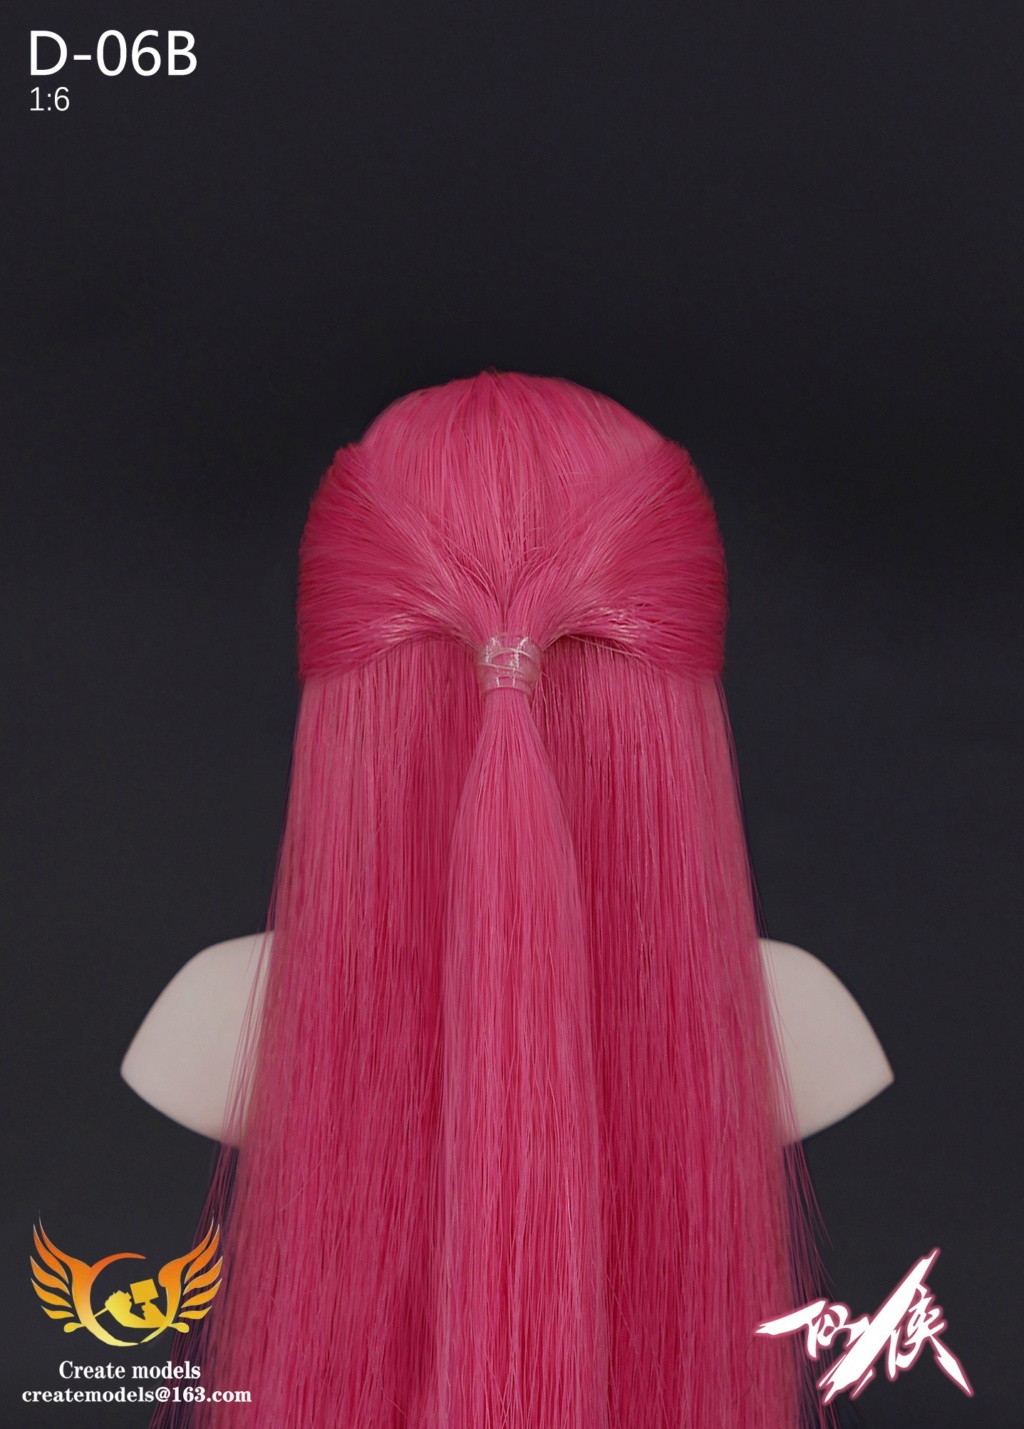 NEW PRODUCT: Createmodels: 1/6 Xianxia series female head - AB two hair colors (D-06) 15341210